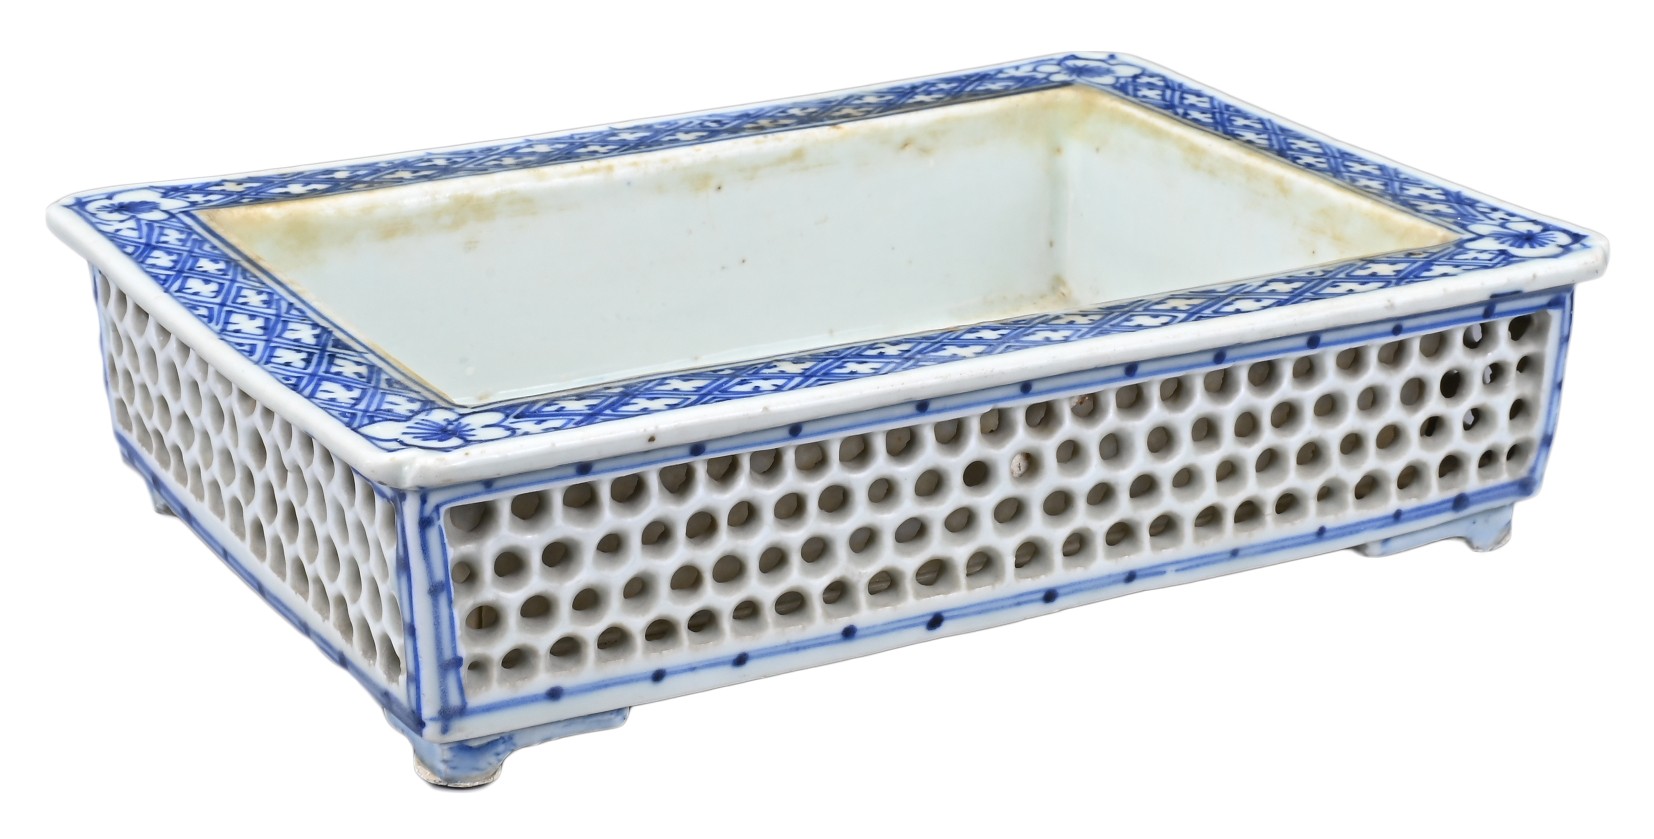 A CHINESE BLUE AND WHITE PORCELAIN NARCISSUS BOWL, 19TH CENTURY. Of rectangular form with outer